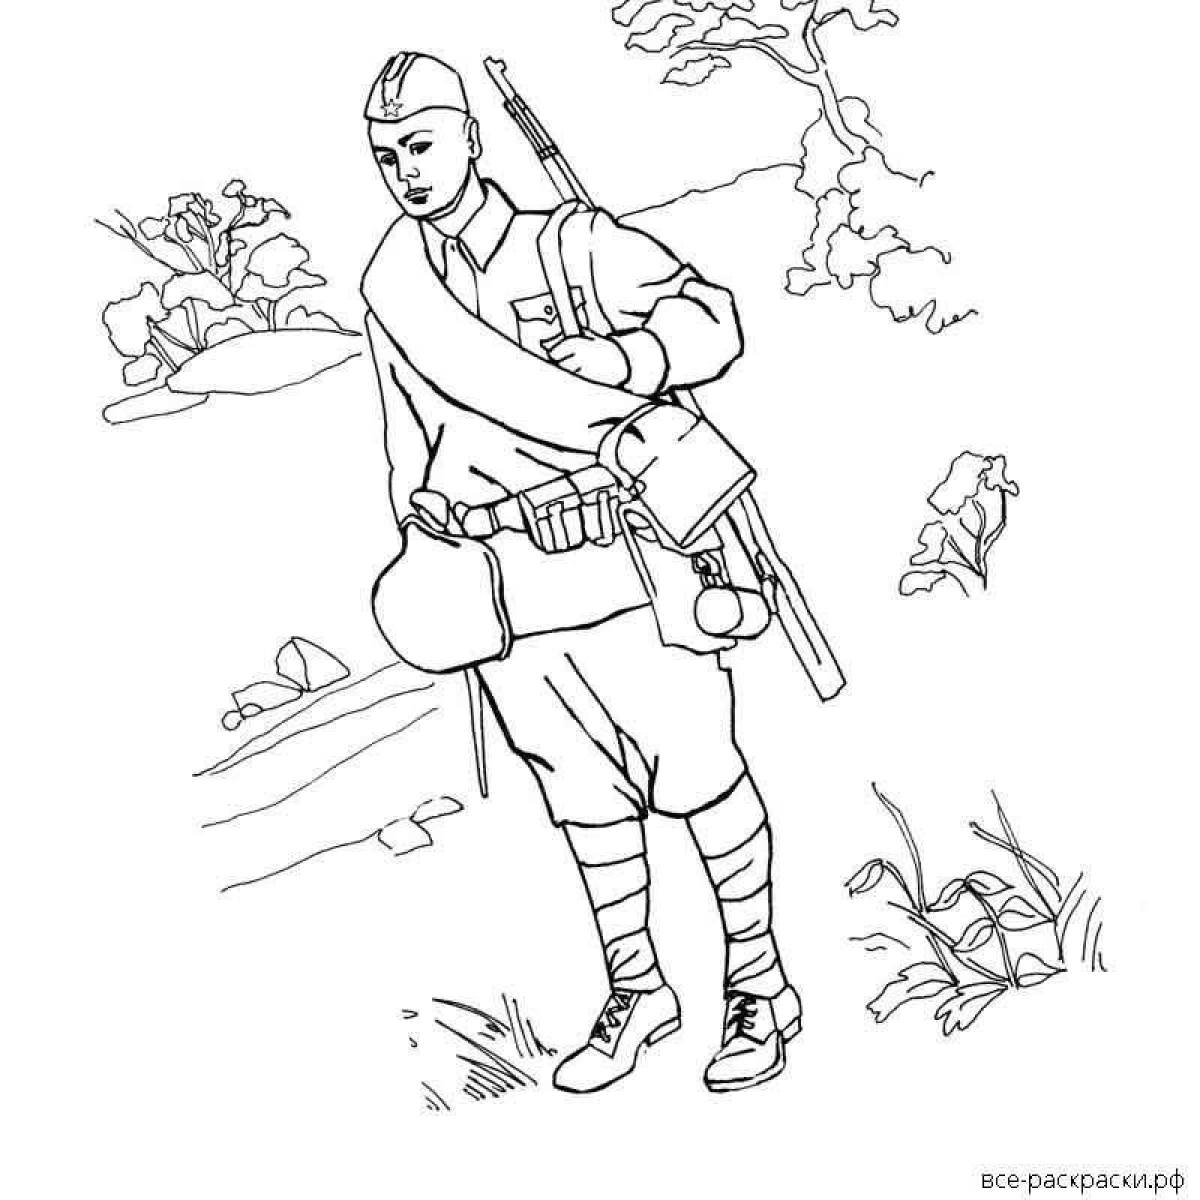 Colourful military coloring for younger students